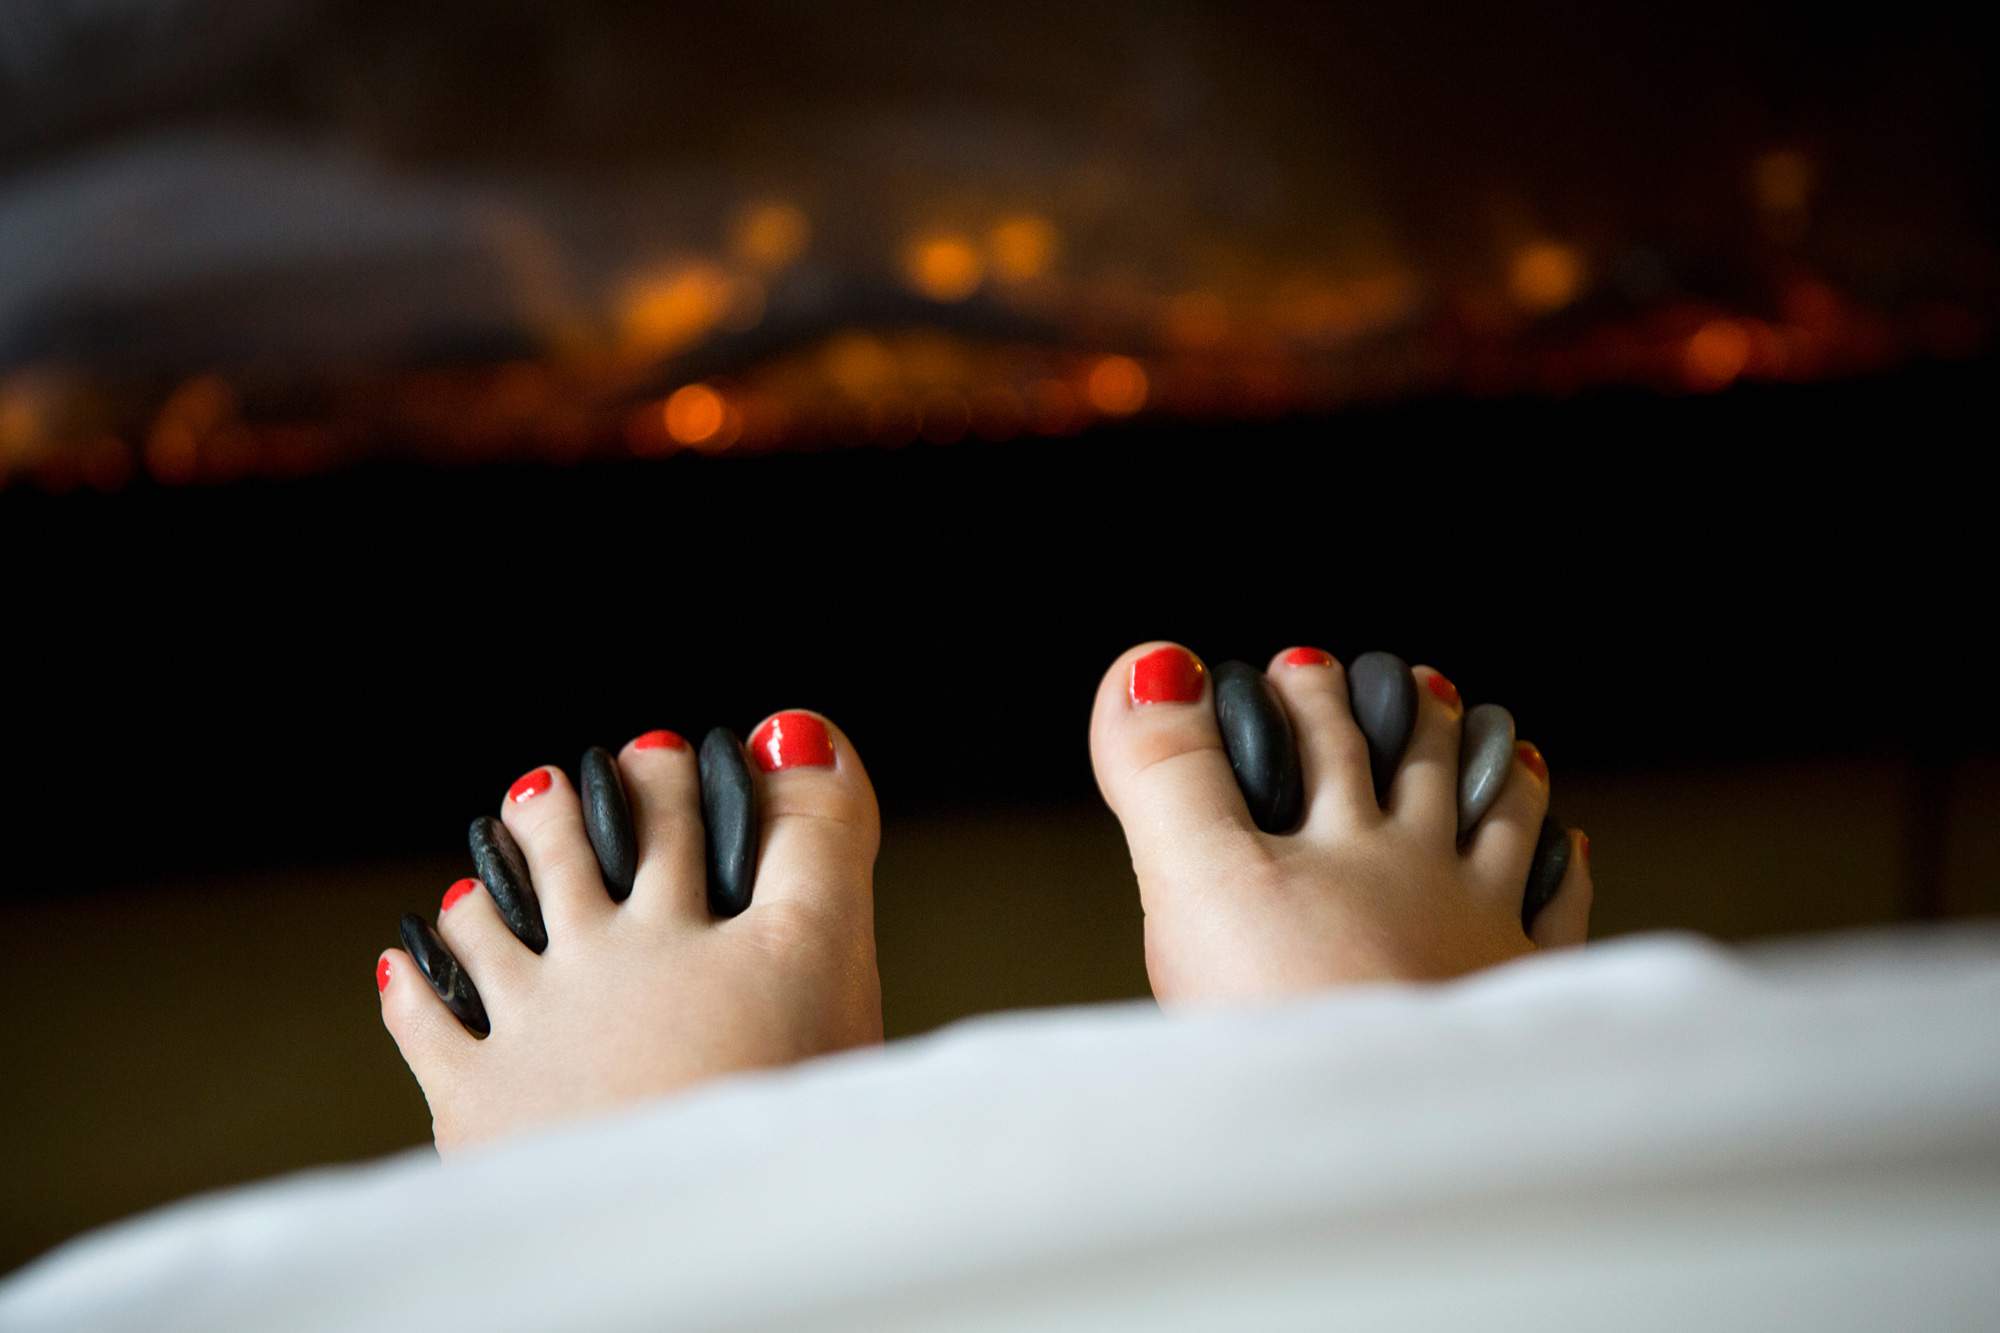 Hot Stone Massage at Rapunzels in Canmore- Come see our amazing massage therapists!